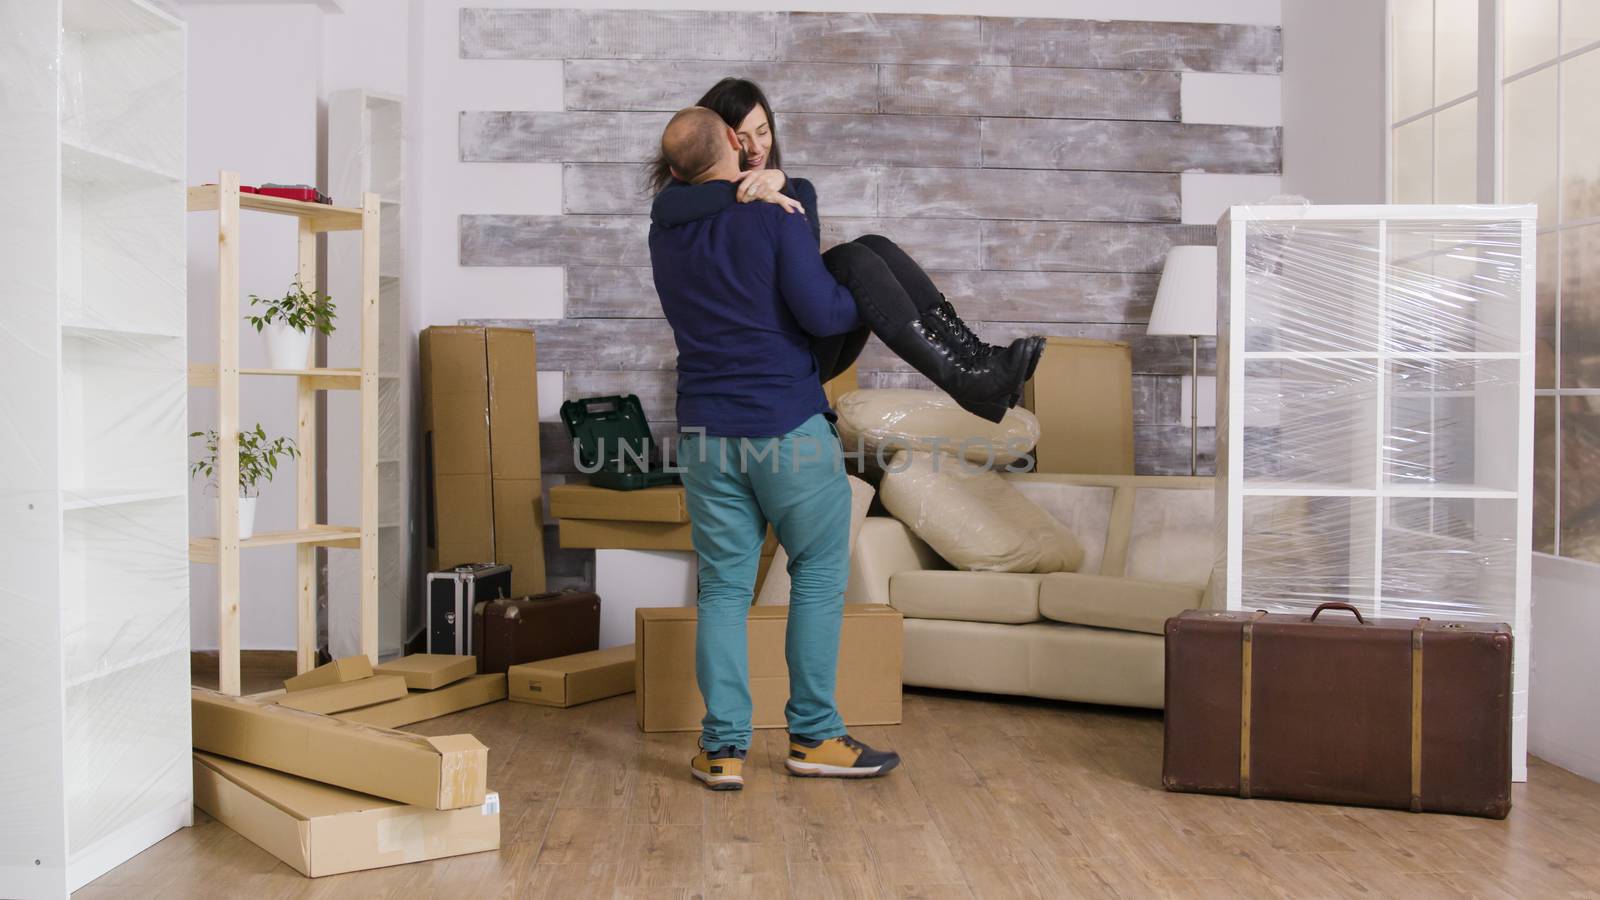 Excited boyfriend spinning his girlfriend in their new apartment. Cheerful young couple.